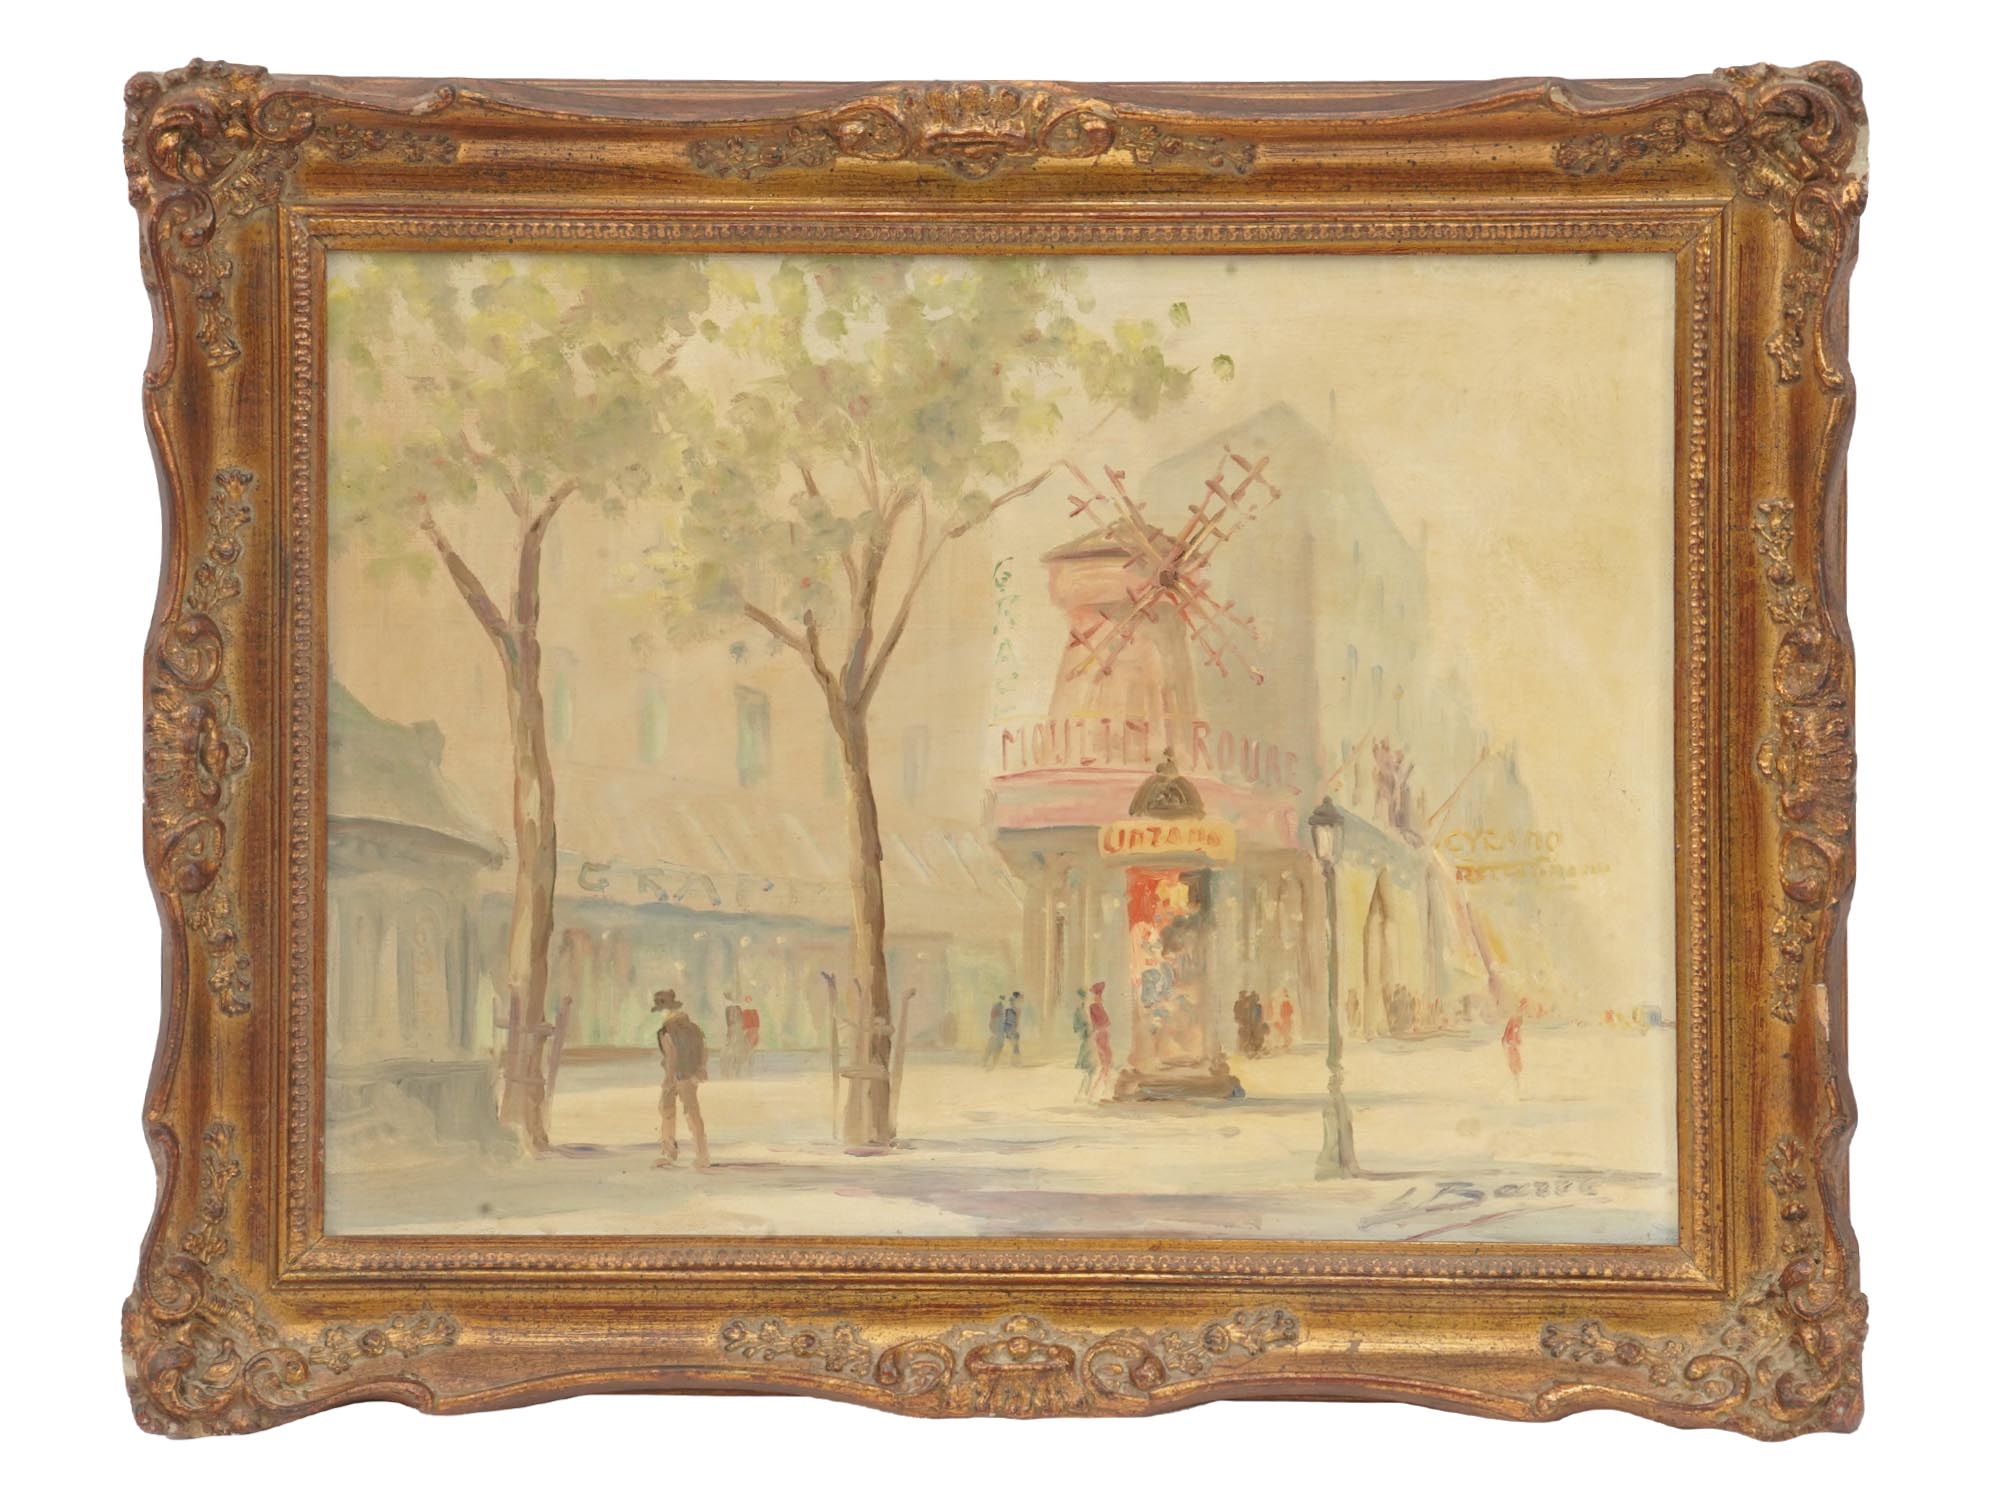 MOULIN ROUGE PARIS OIL PAINTING SIGNED BY L BARRE PIC-0